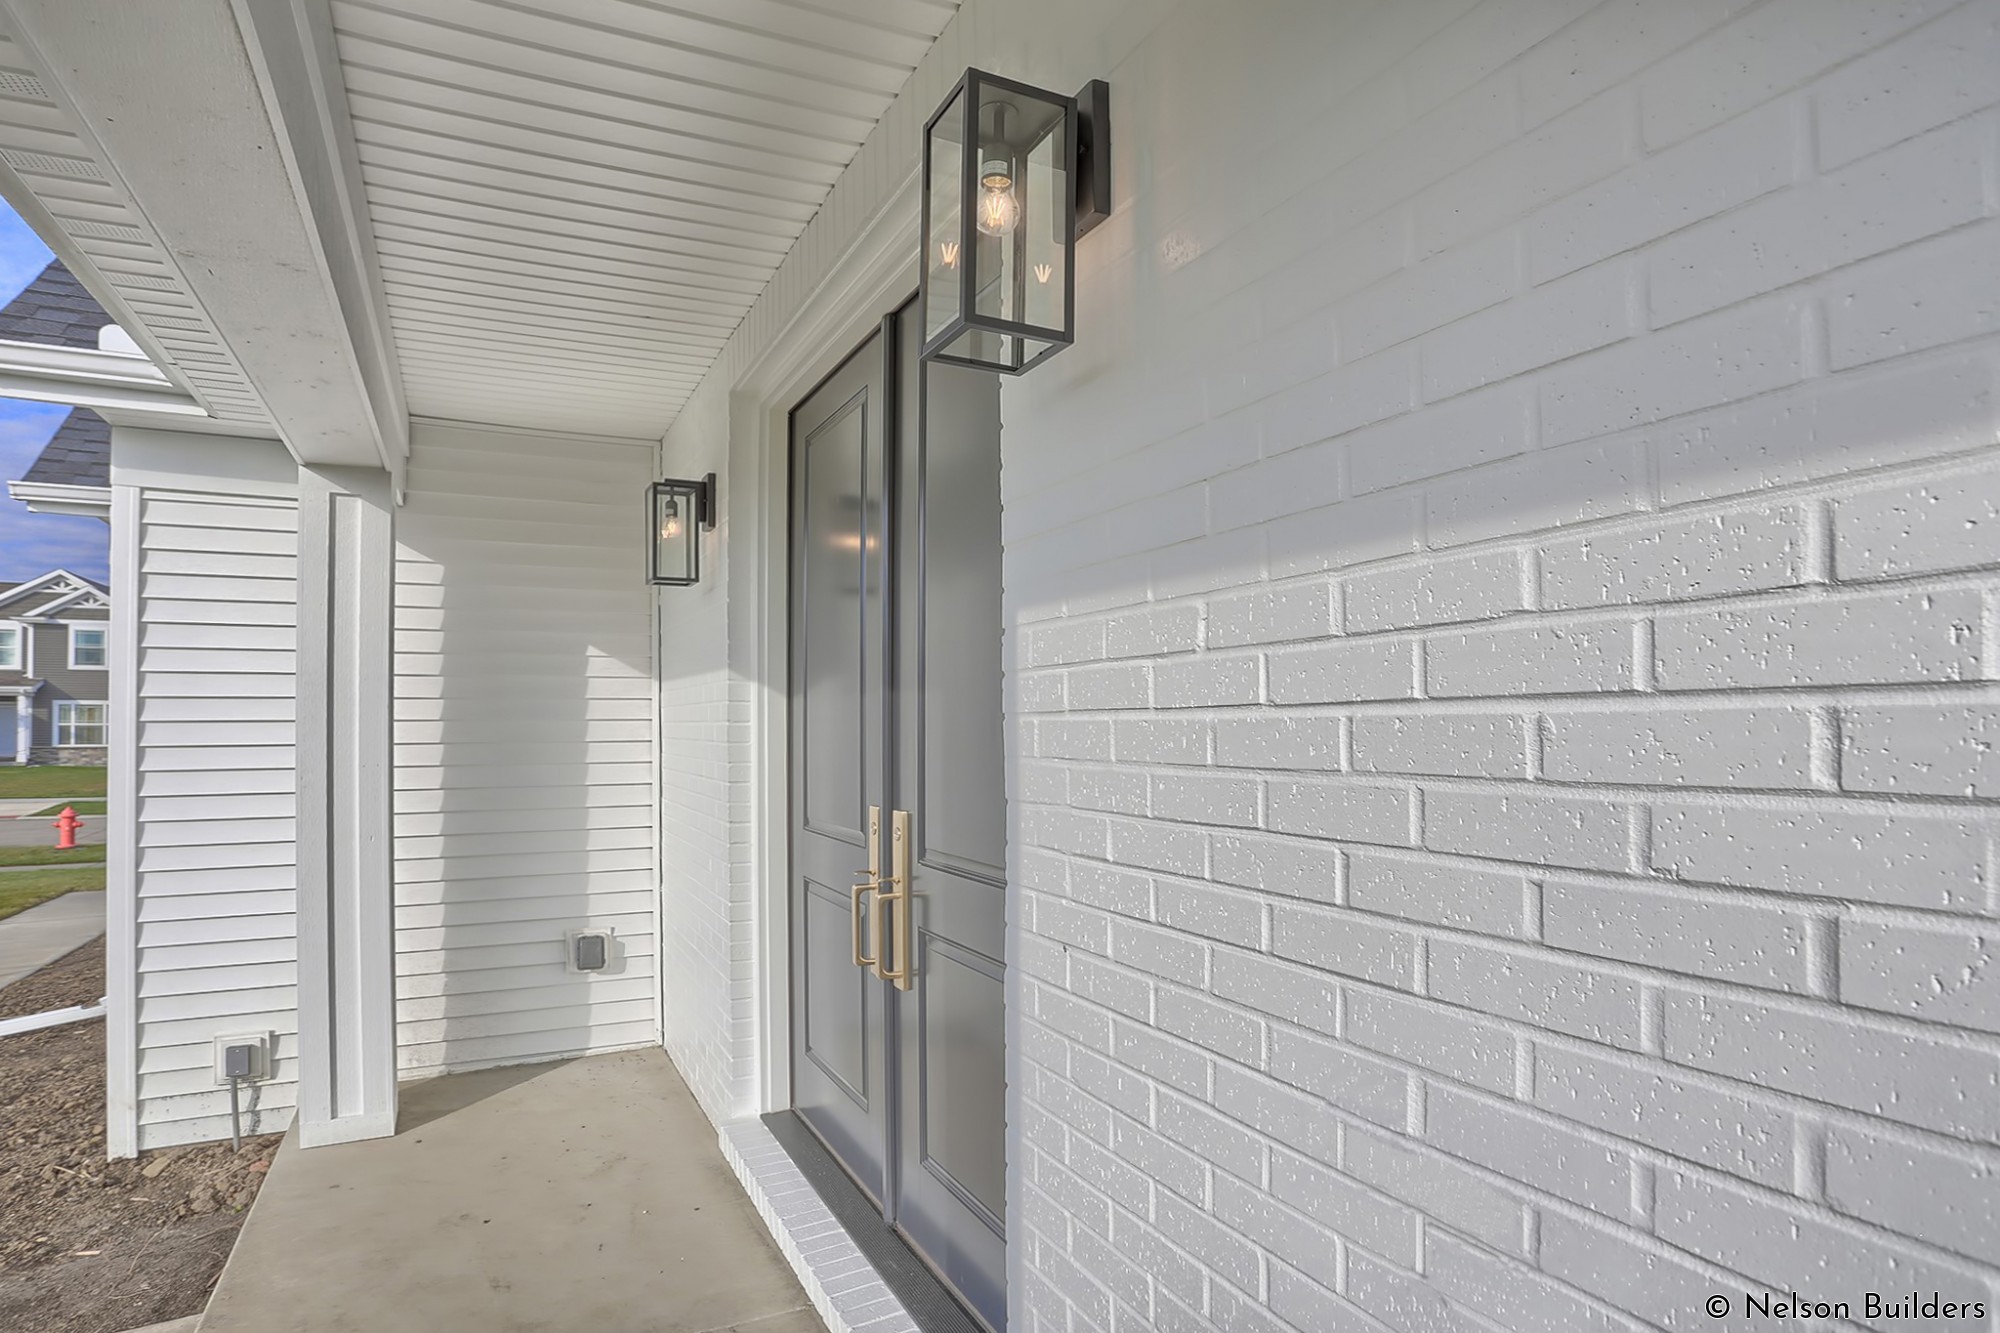 The contrast on the front porch brings elegance to the entryway, from the brass handles, to the dark colored door, to the painted brick.